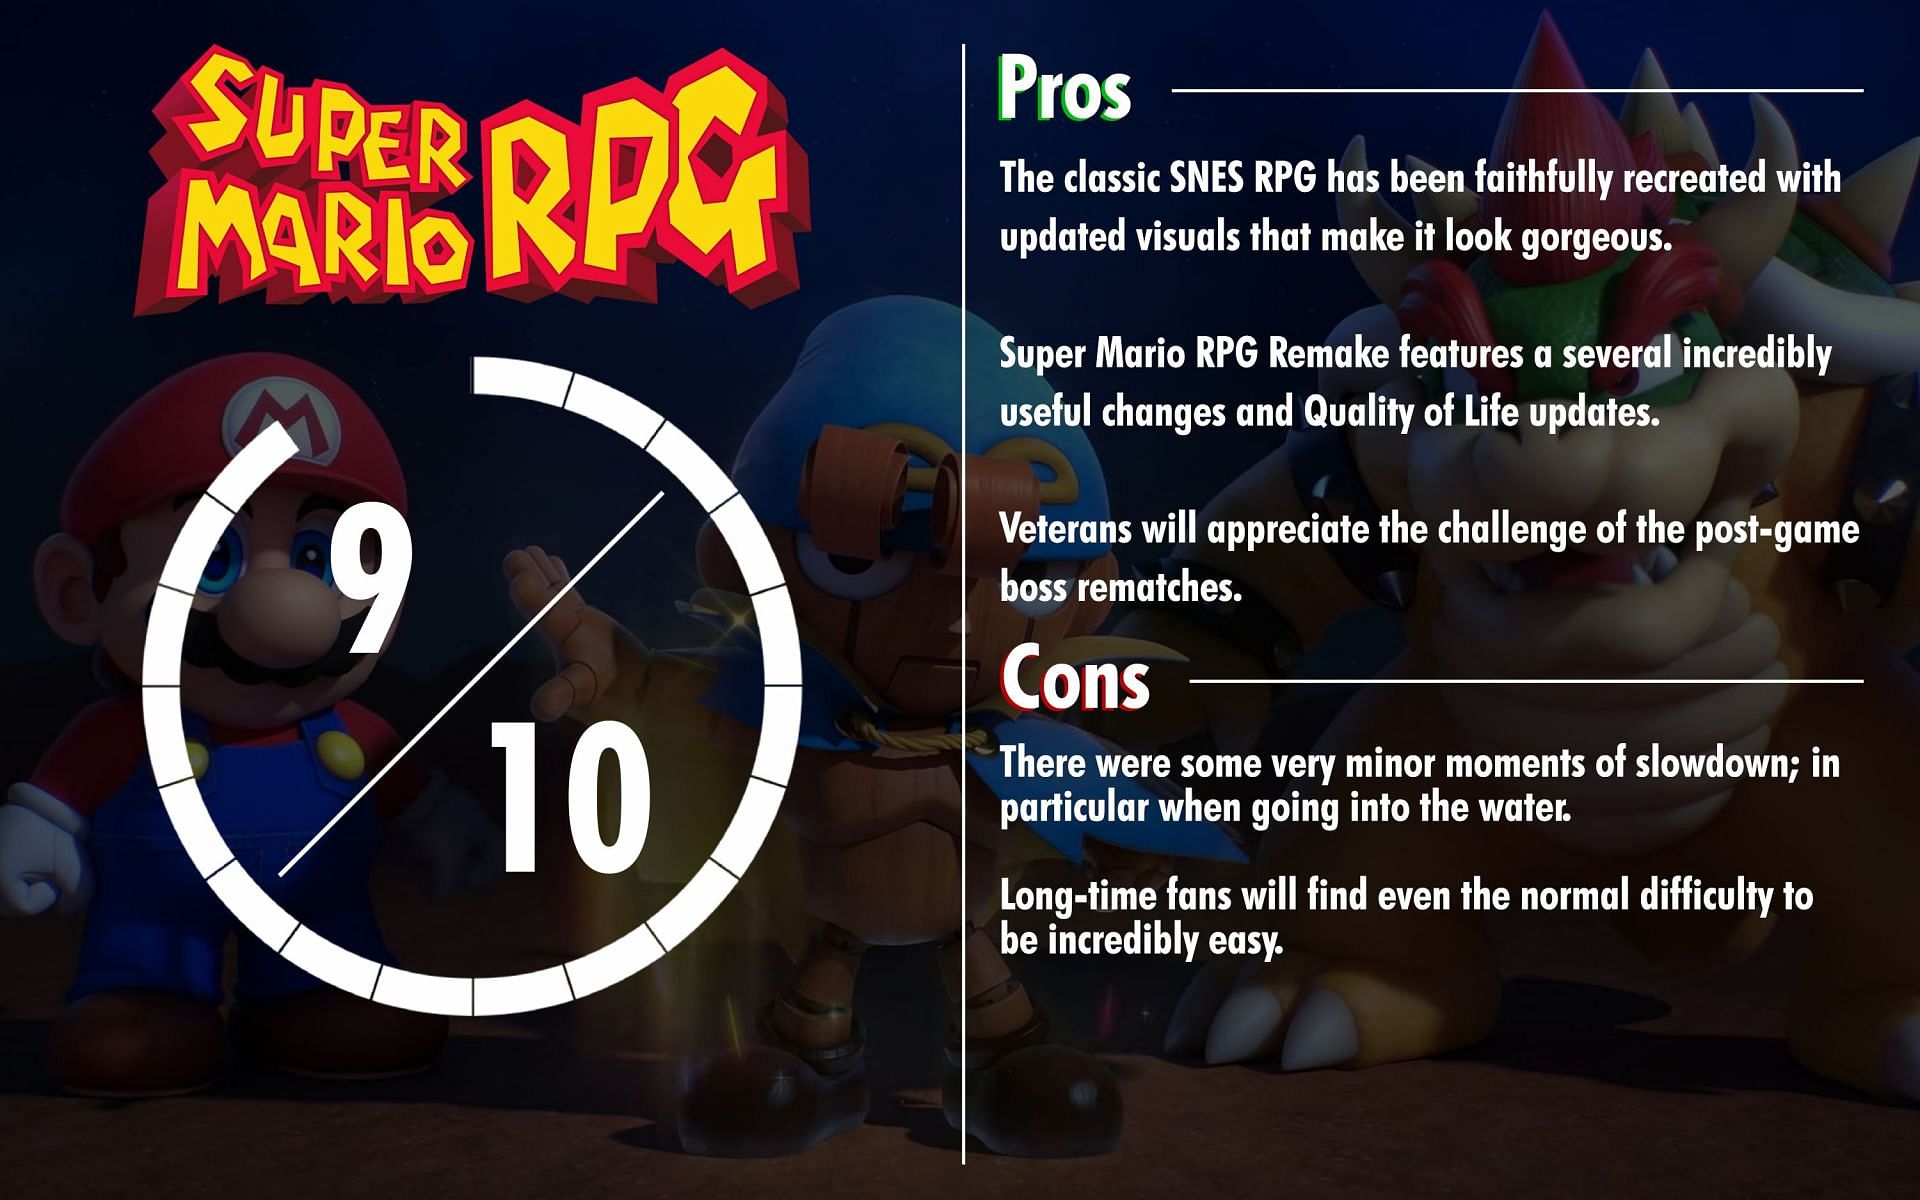 Super Mario RPG Remake brings back a classic for a modern audience (Image via Sportskeeda)